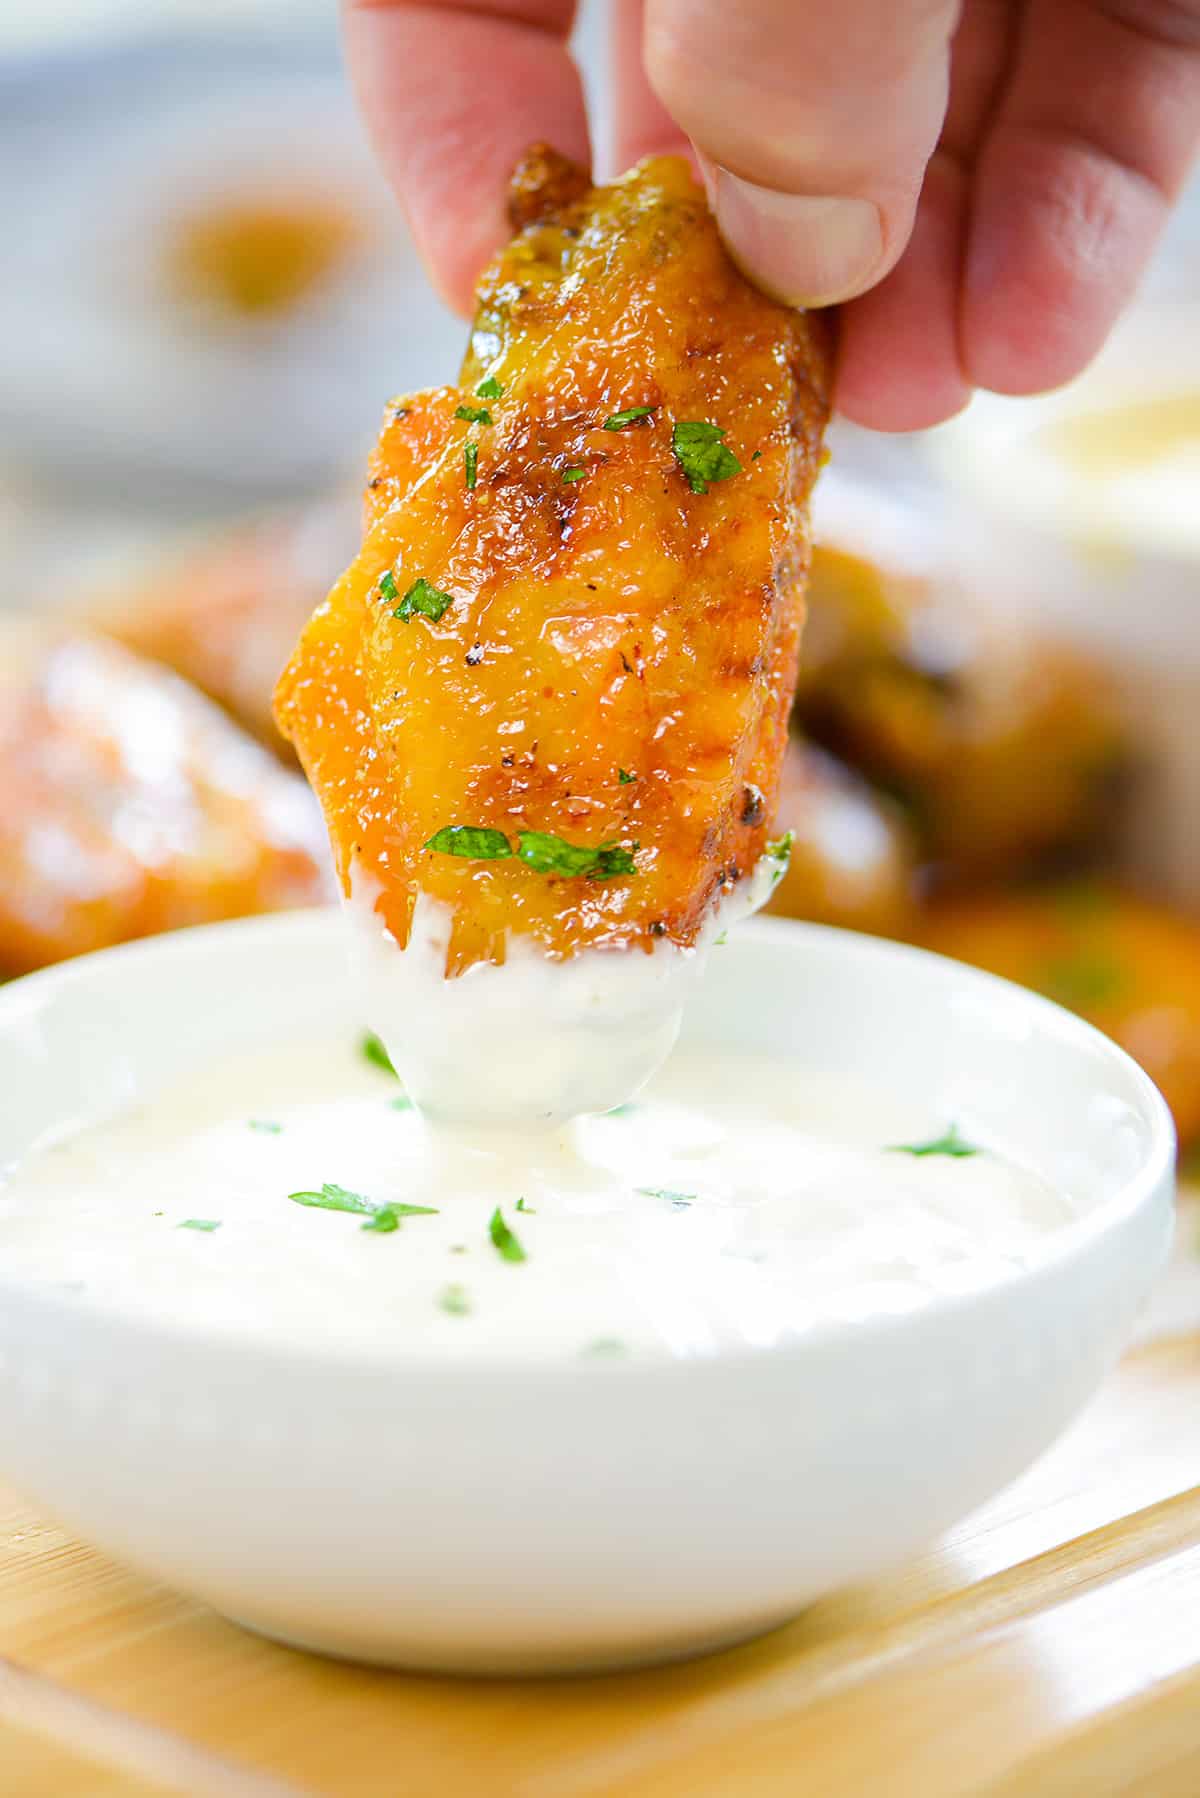 Honey mustard wing being dipping into ranch.